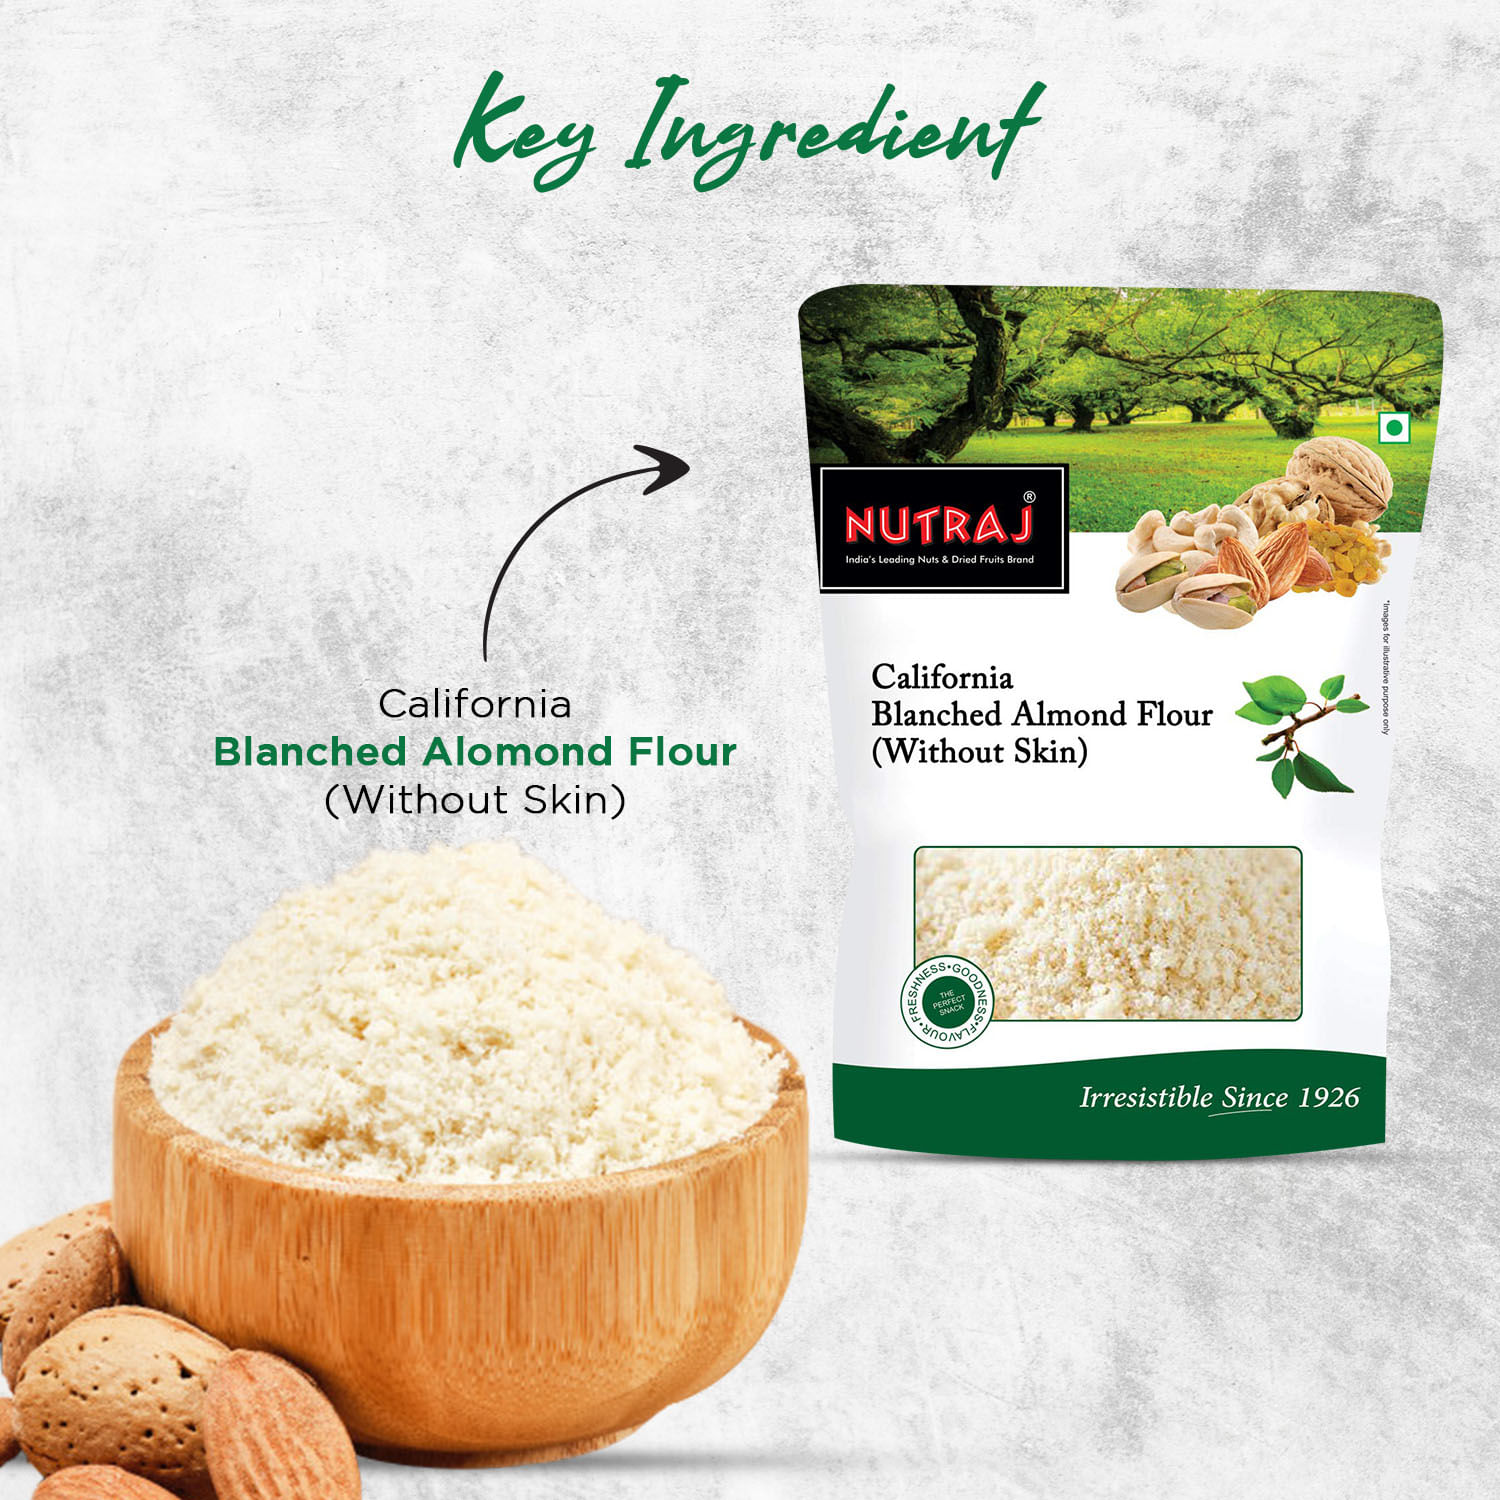 Nutraj California Blanched Almond Flour (Without Skin) 1Kg (5 X 200g)